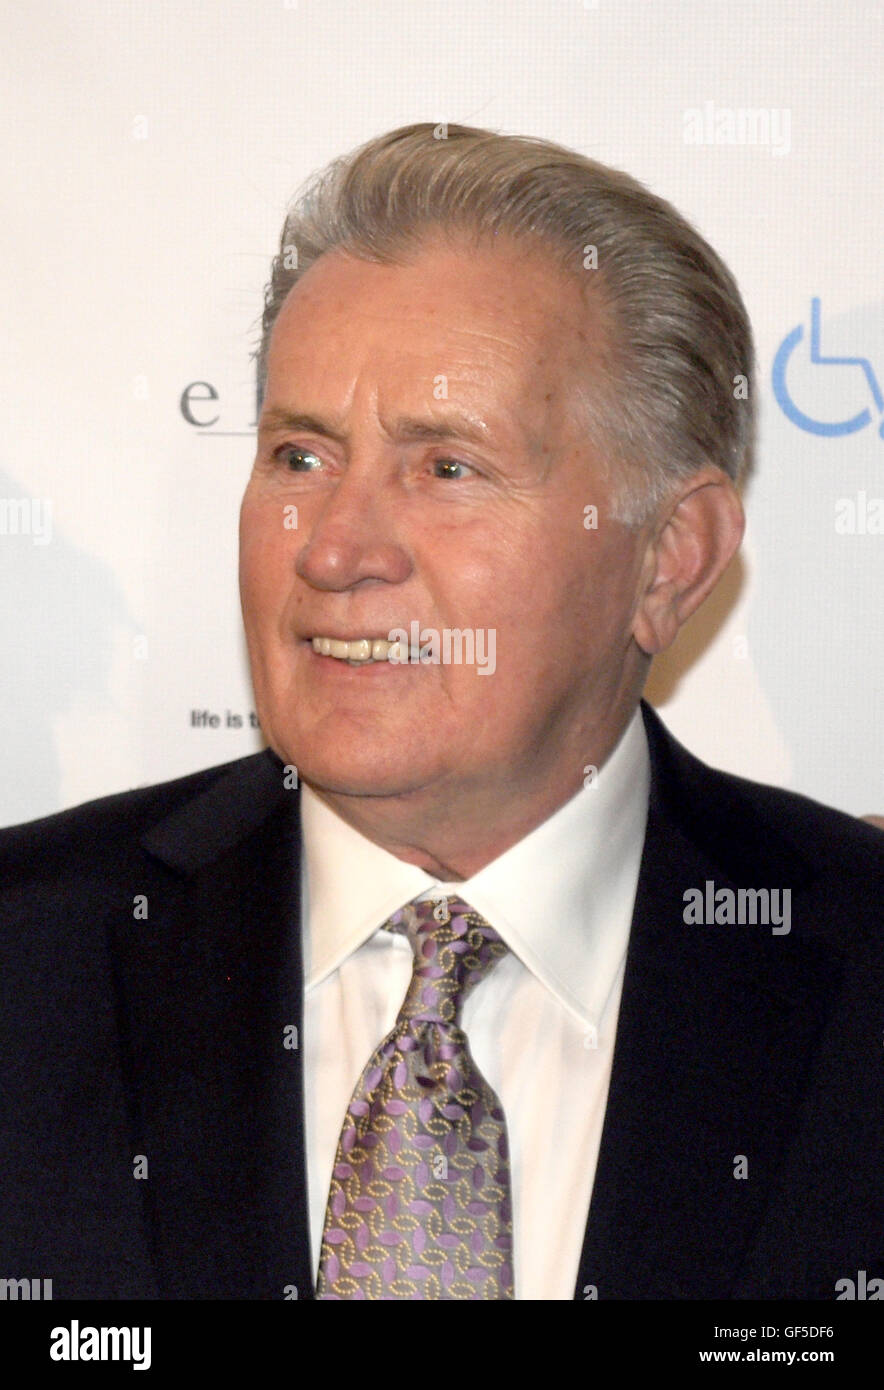 Martin Sheen at 'The Way' premiere benefitting the Walkabout Foundation at the SVA Theater in New York City. October 5, 2011. Credit: Edwin Garcia/MediaPunch Stock Photo